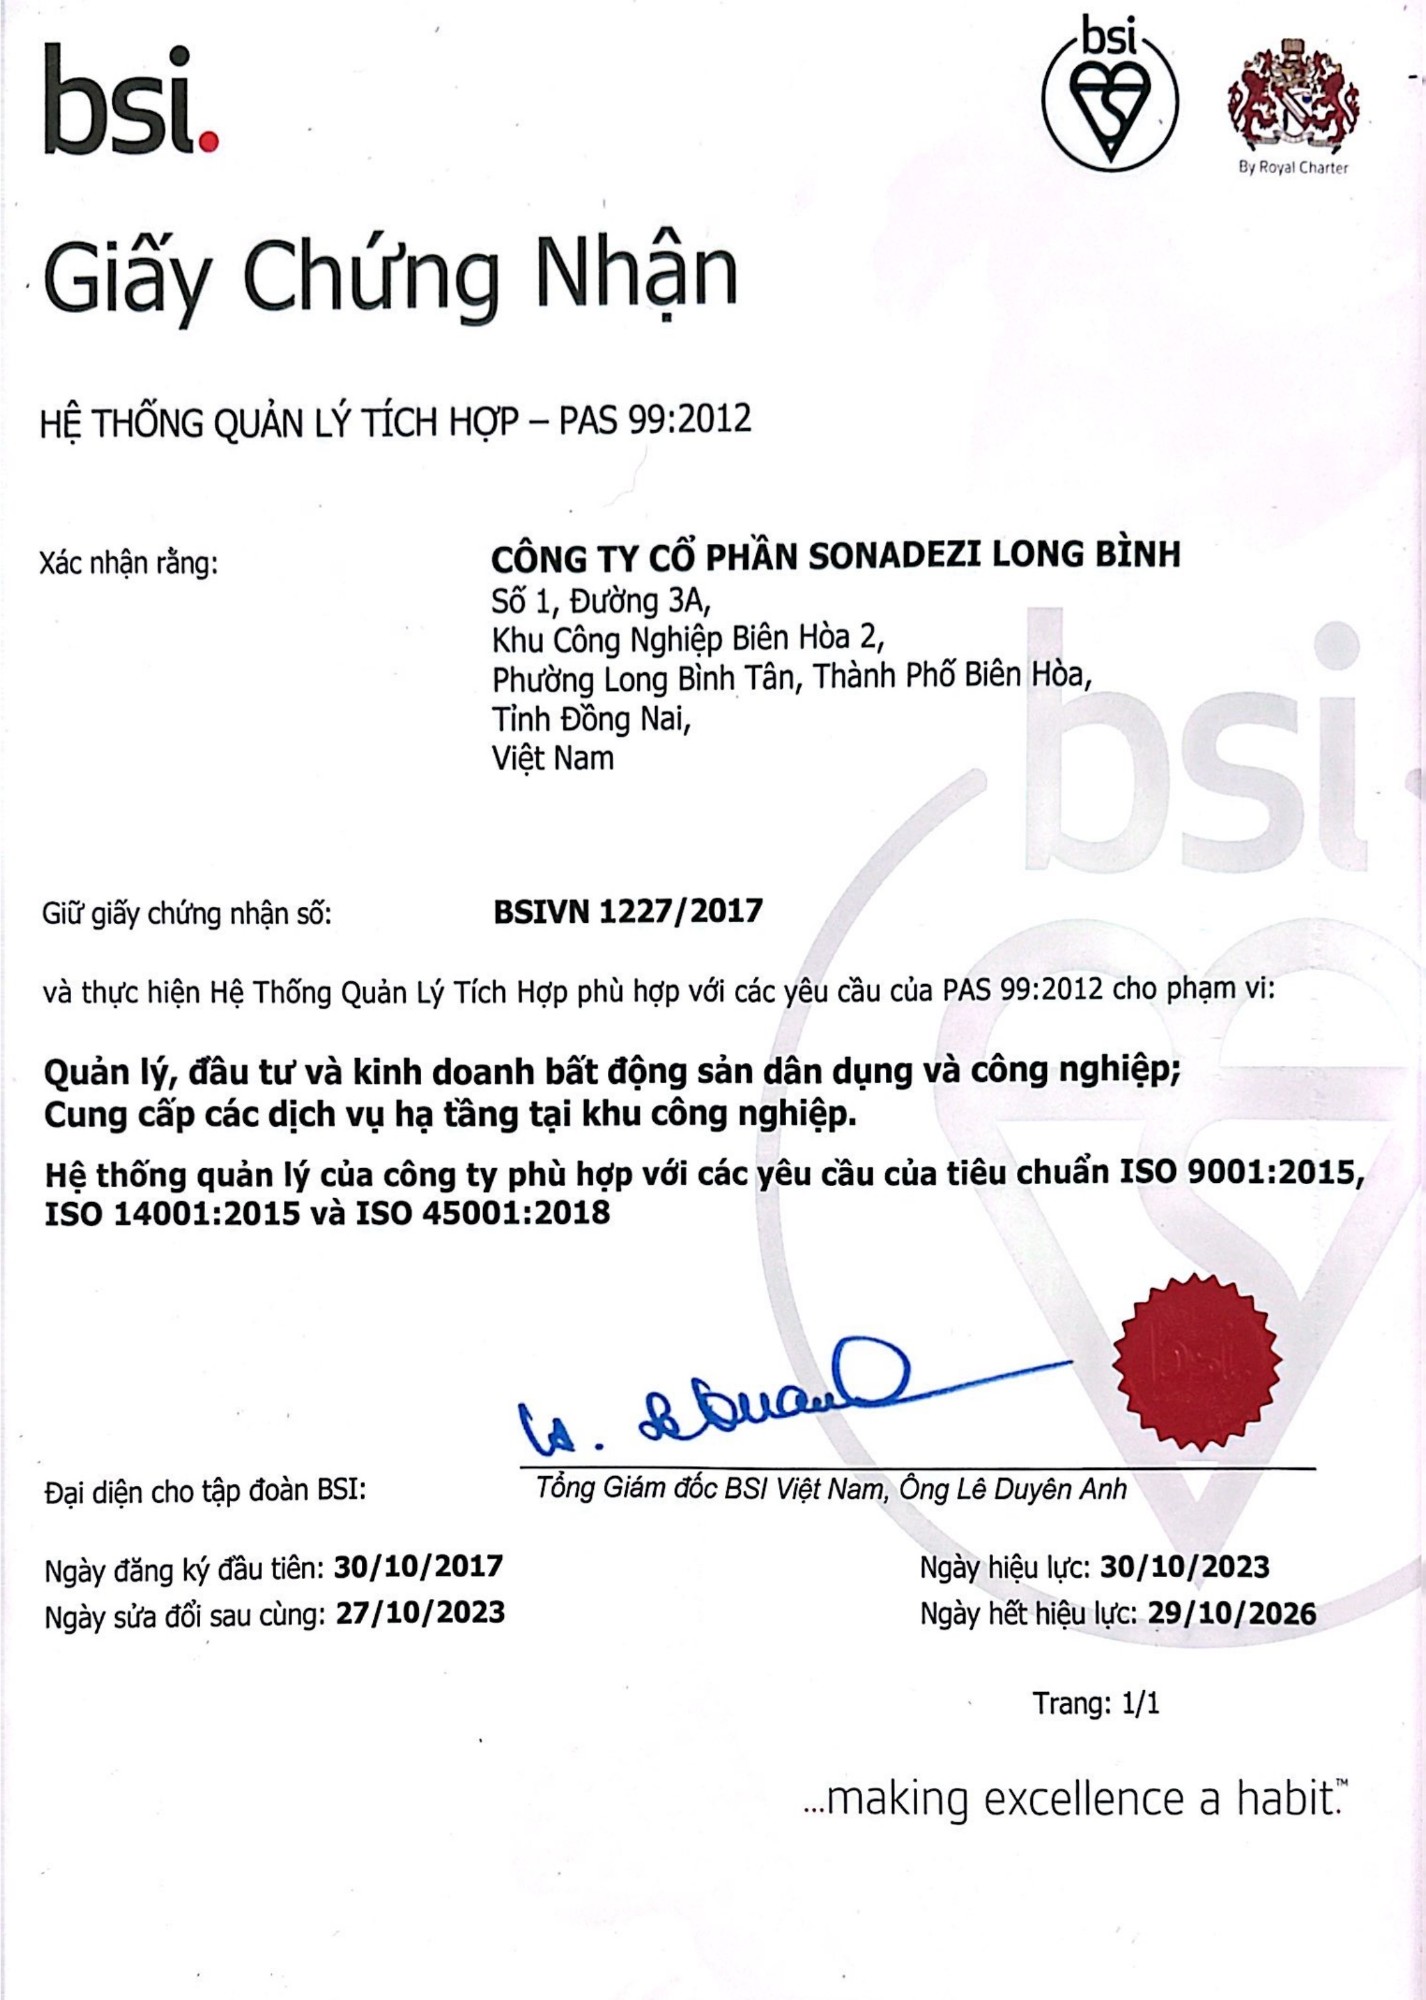 Re-certification of PAS 99 integratedmanagement system according to ISO 9001:2015, ISO 14001:2015, ISO 45001:2018 standards of Sonadezi Long Binh Company.